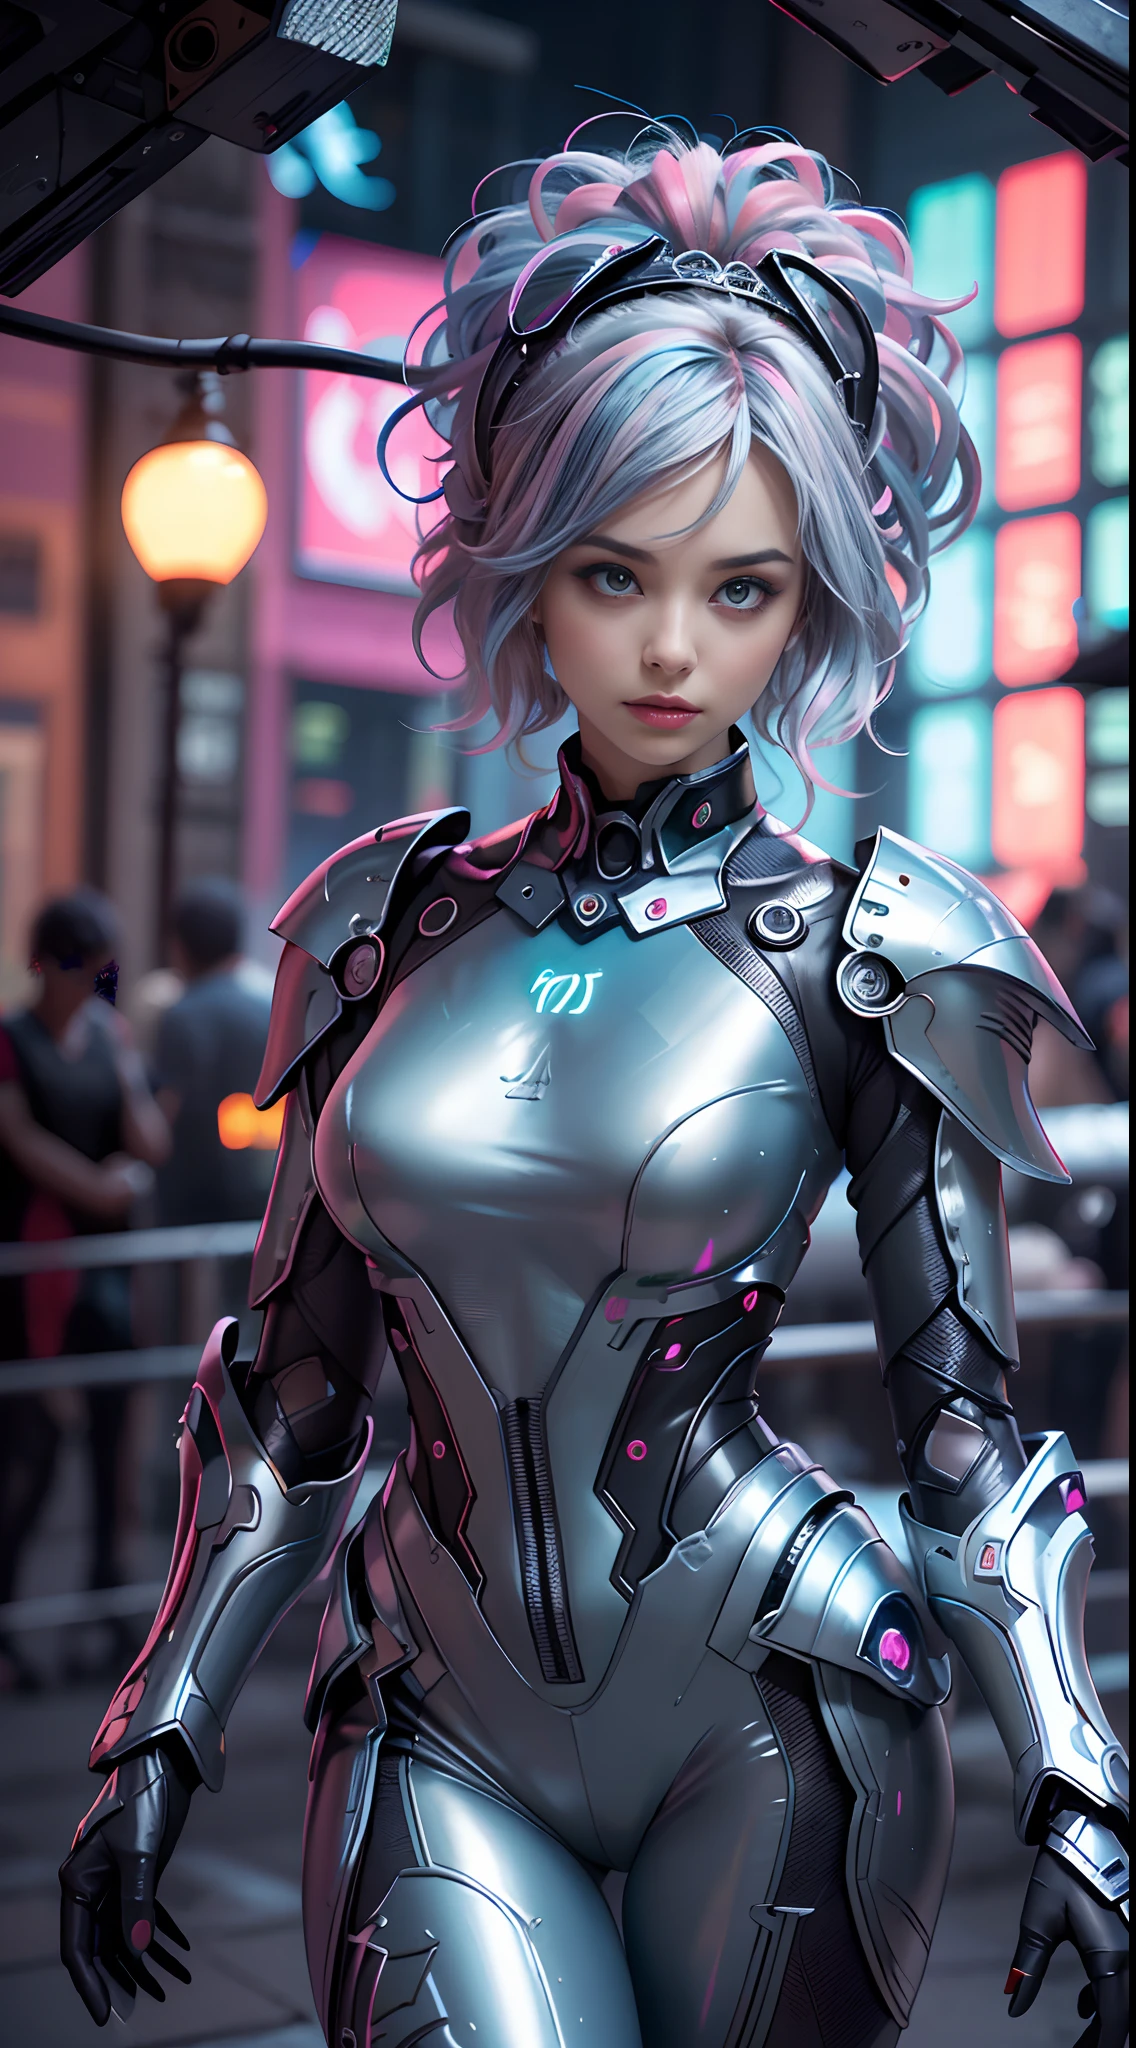 unreal engine:1.4,UHD,La Best Quality:1.4, photorealistic:1.4, skin texture:1.4, Masterpiece:1.8,first work, Best Quality, 1girl, Ives Girl, mecha, beautiful  lighting, (neon light: 1.2), (evening: 1.5), "first work, Best Quality, 1chica, Full length portrait, pose sensual, ojos bluees, multicolored hair+the payment:1.3+rosado:1.3+blue:1.3, Sculpted legs and tempting curves, full breasts, Beautiful face, many drops of water, clouds, twilights, Open floor plan, watercolor, neon light:1.2, evening:1.5, mecha, beautiful  lighting, Bright neon light: 1.2, unforgettable mysterious night: 1.5",,beautiful fine hands,（Beautiful and detailed eye description）